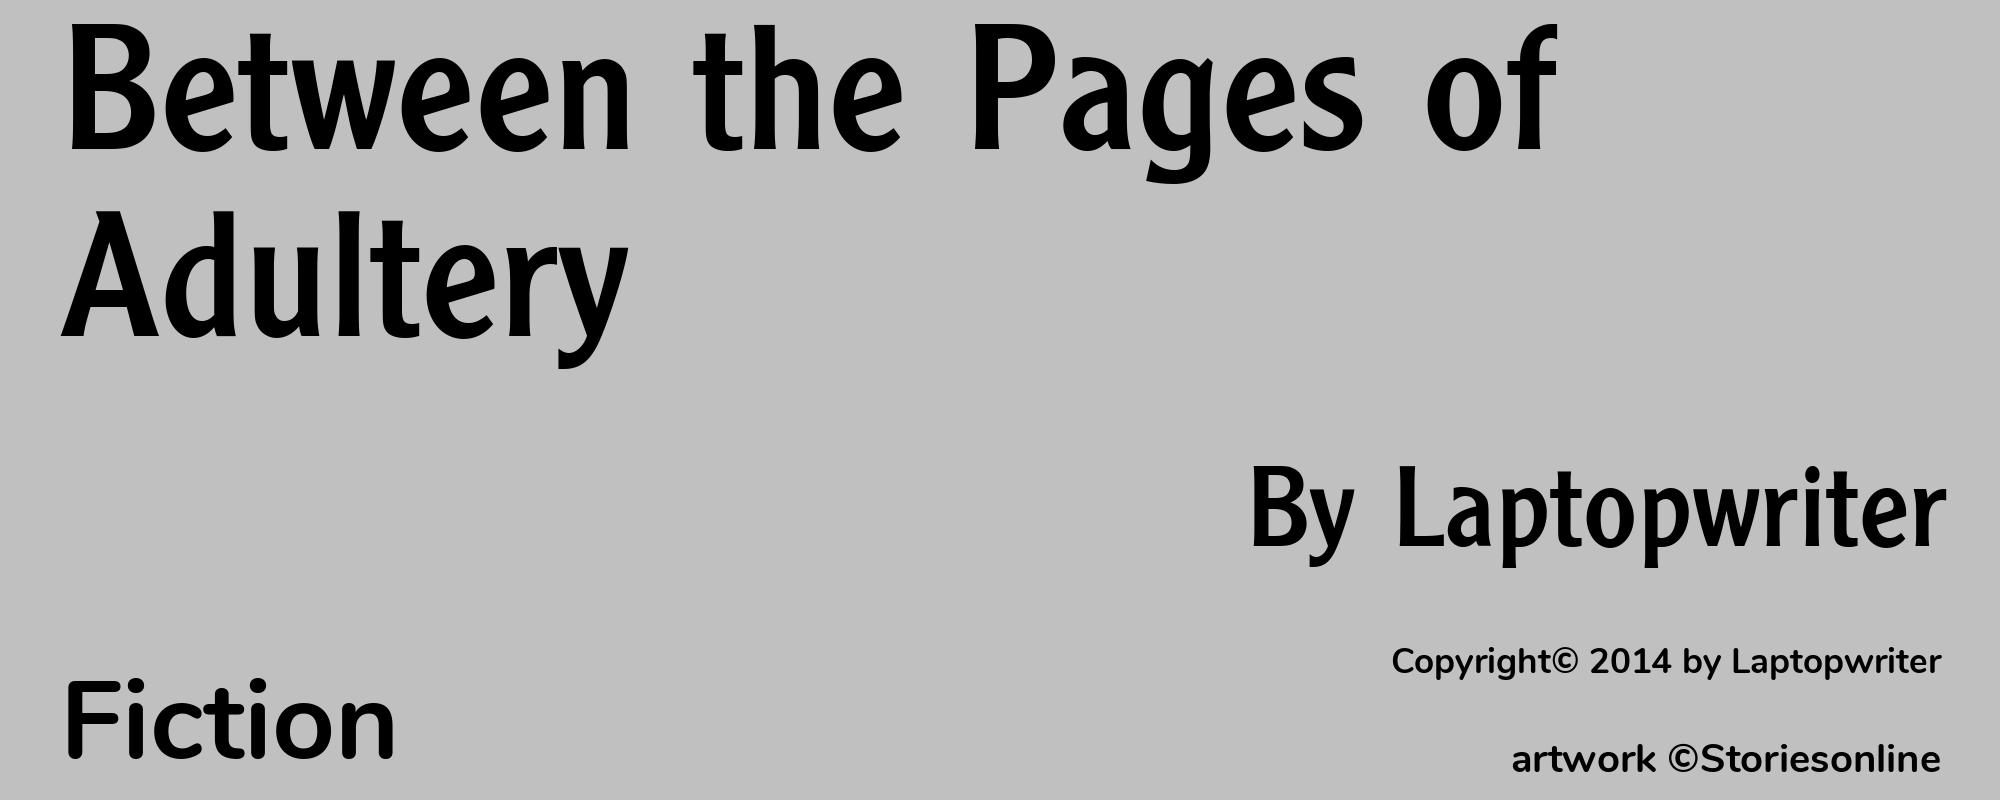 Between the Pages of Adultery - Cover